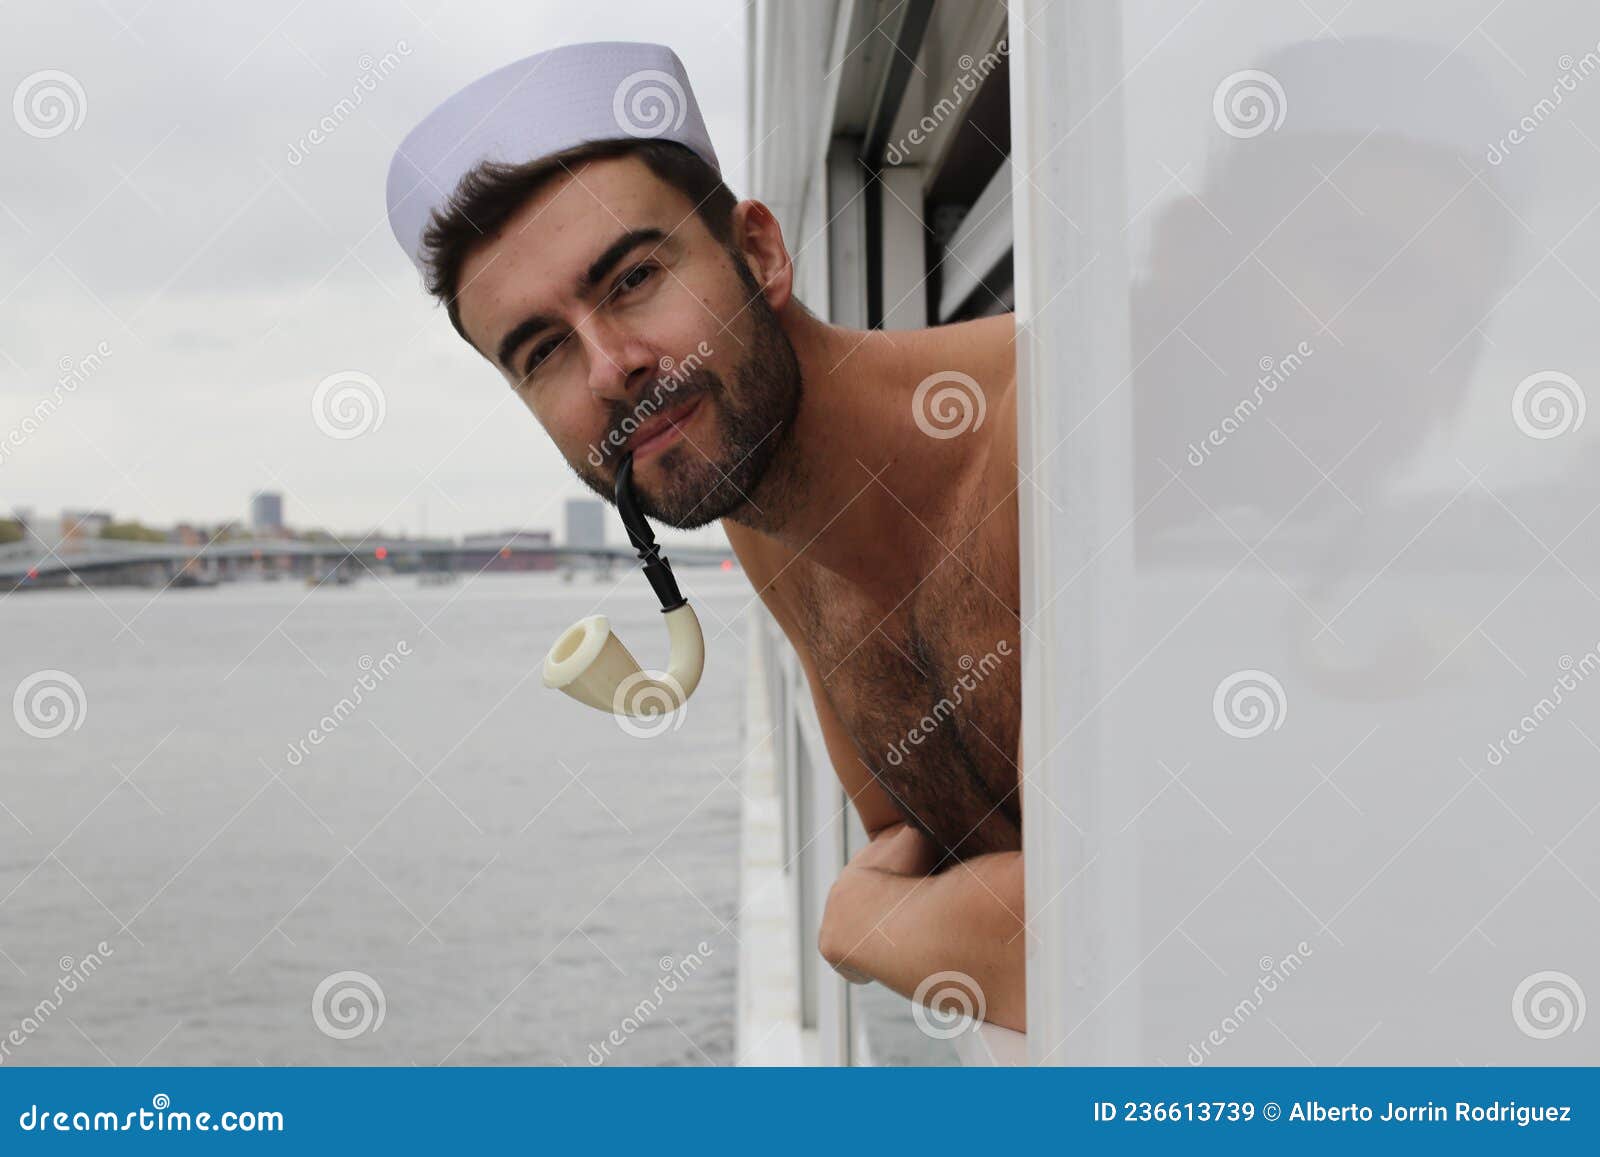 Classic Shirtless Looking Sailor Smoking with Pipe Stock Image - Image ...